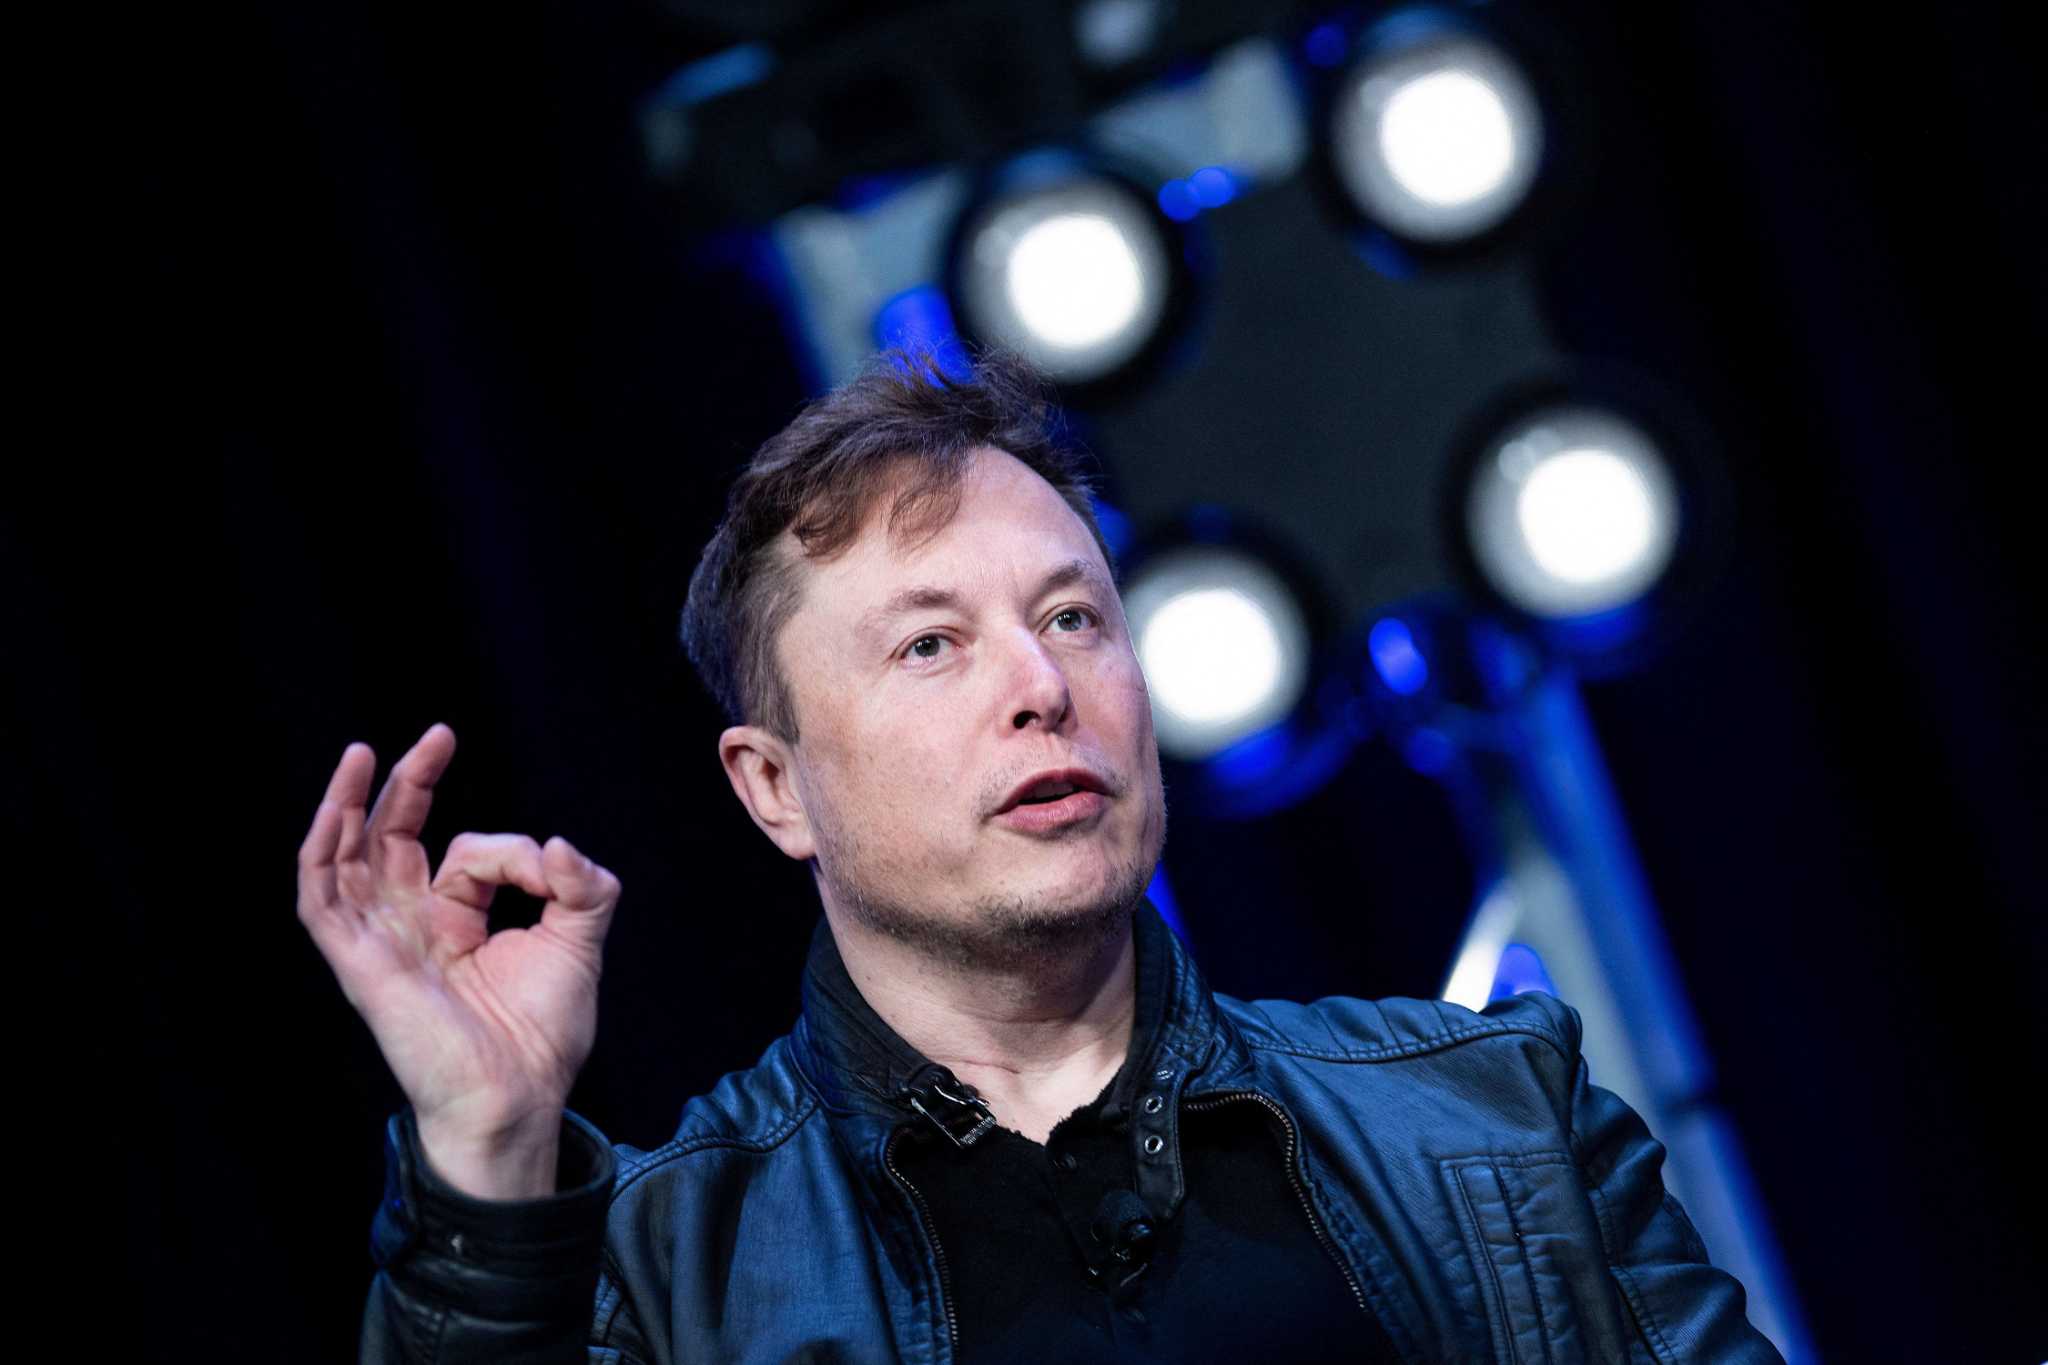 “The deal is on hold” Elon musk reveals shocking information about his Twitter deal